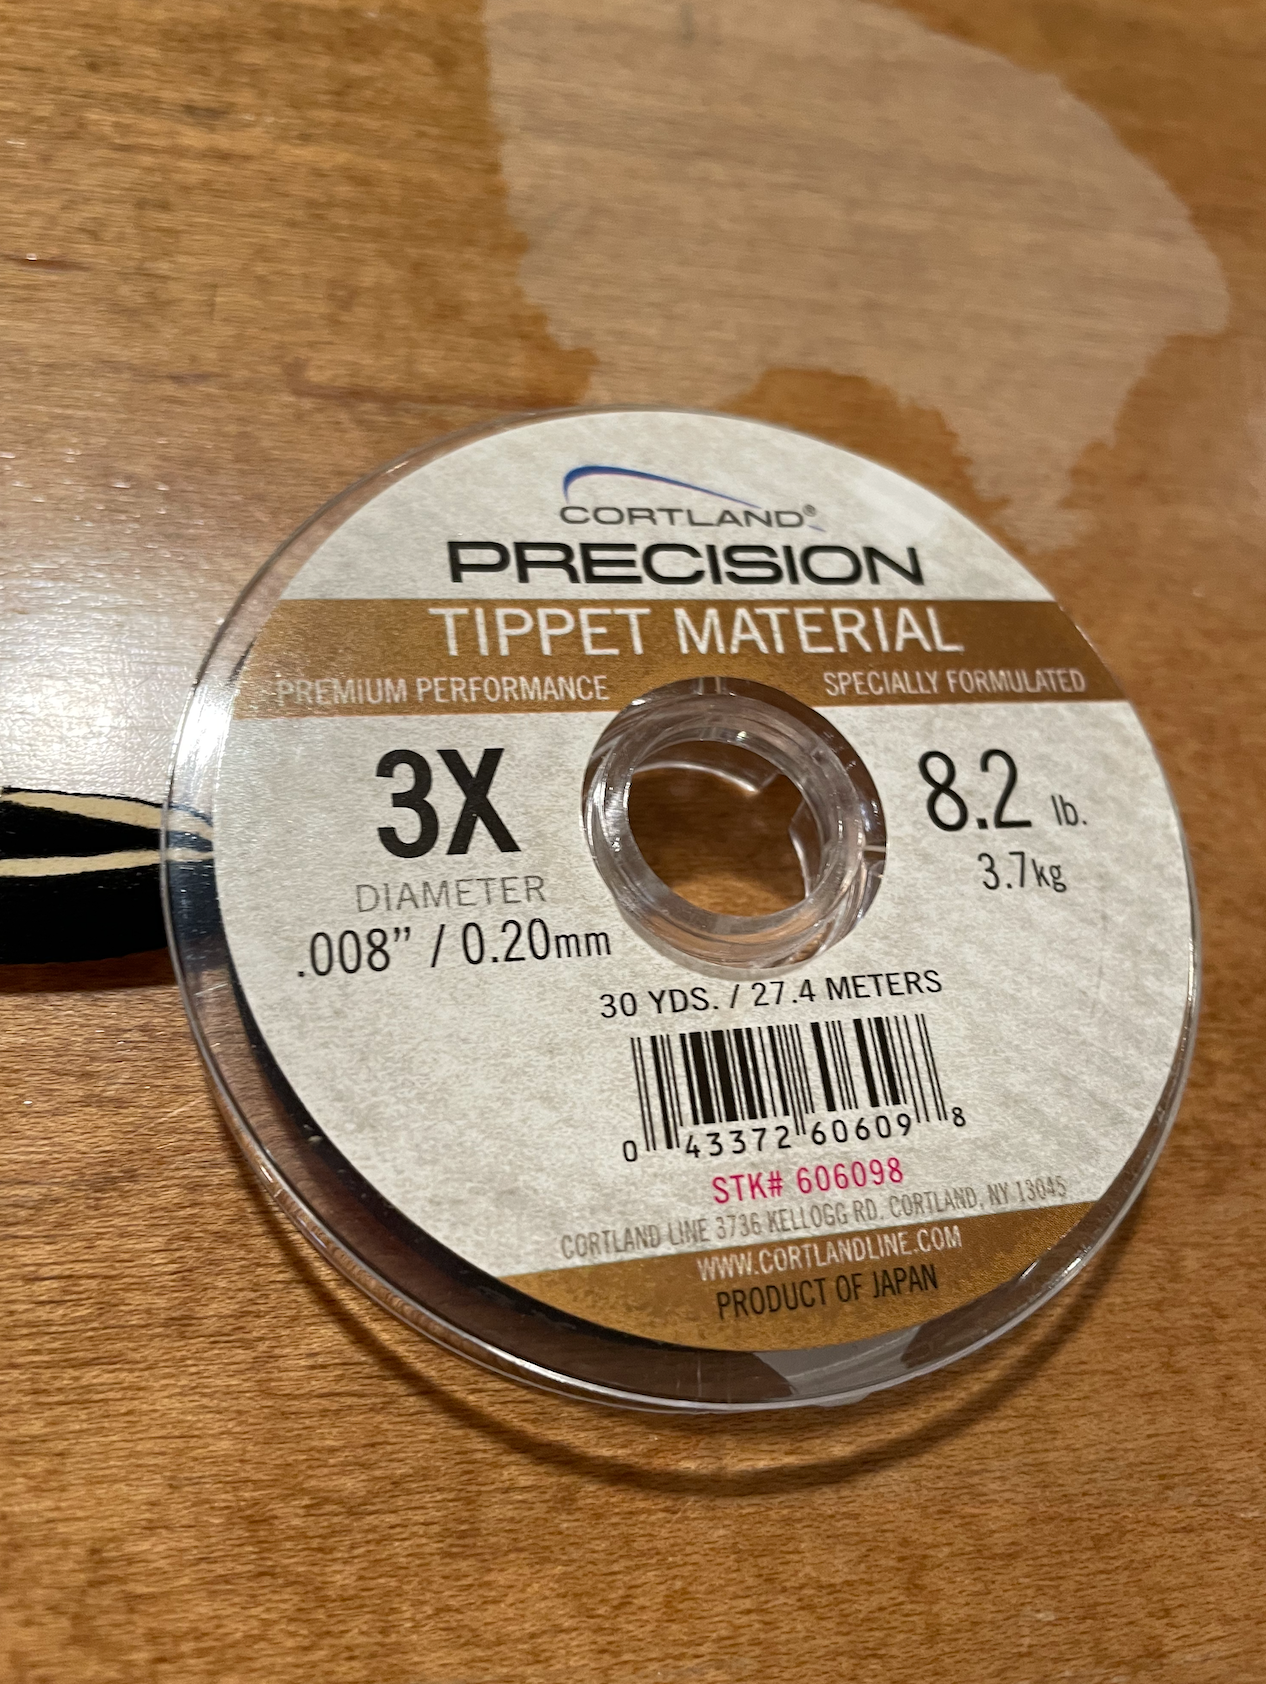 Precision Tippet Material